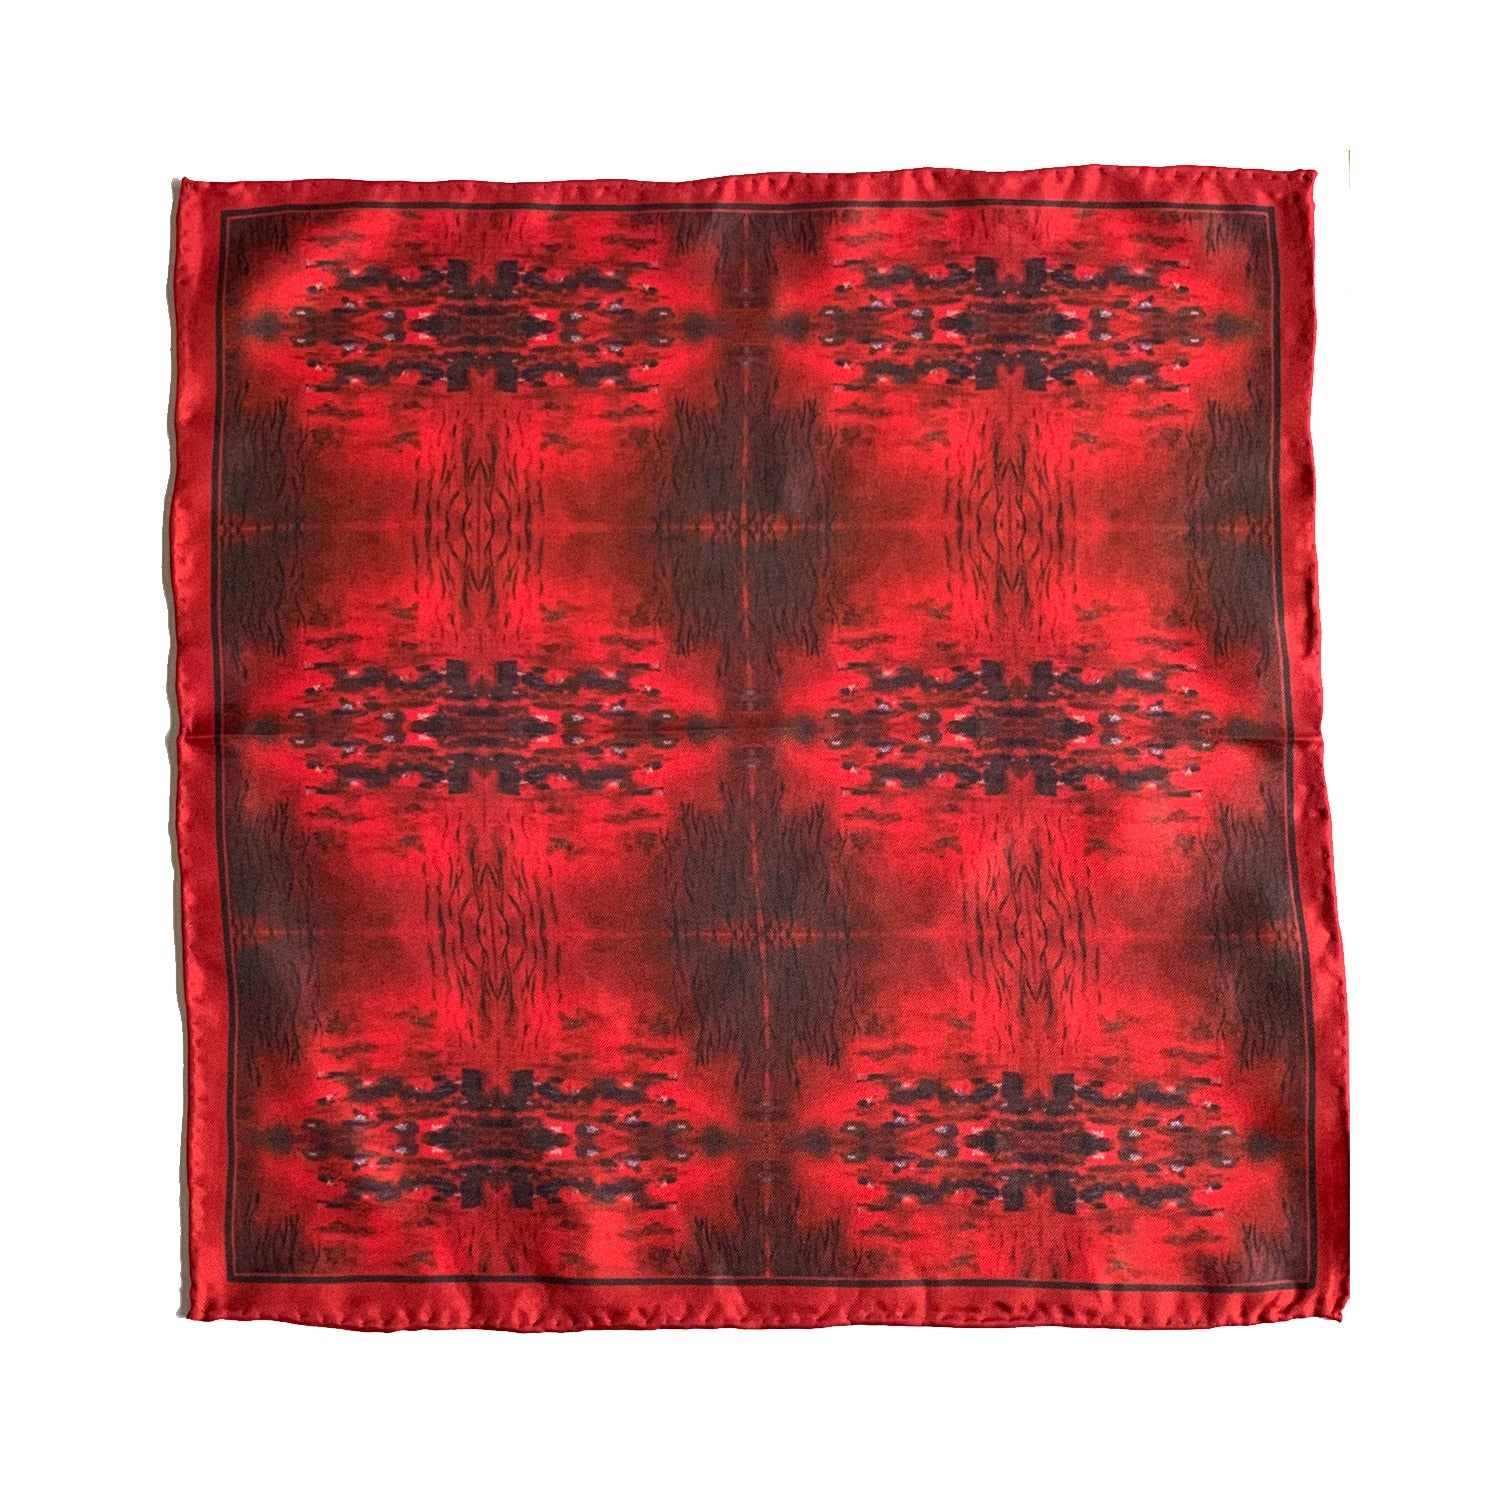 Fire Willow- Silk Pocket Square